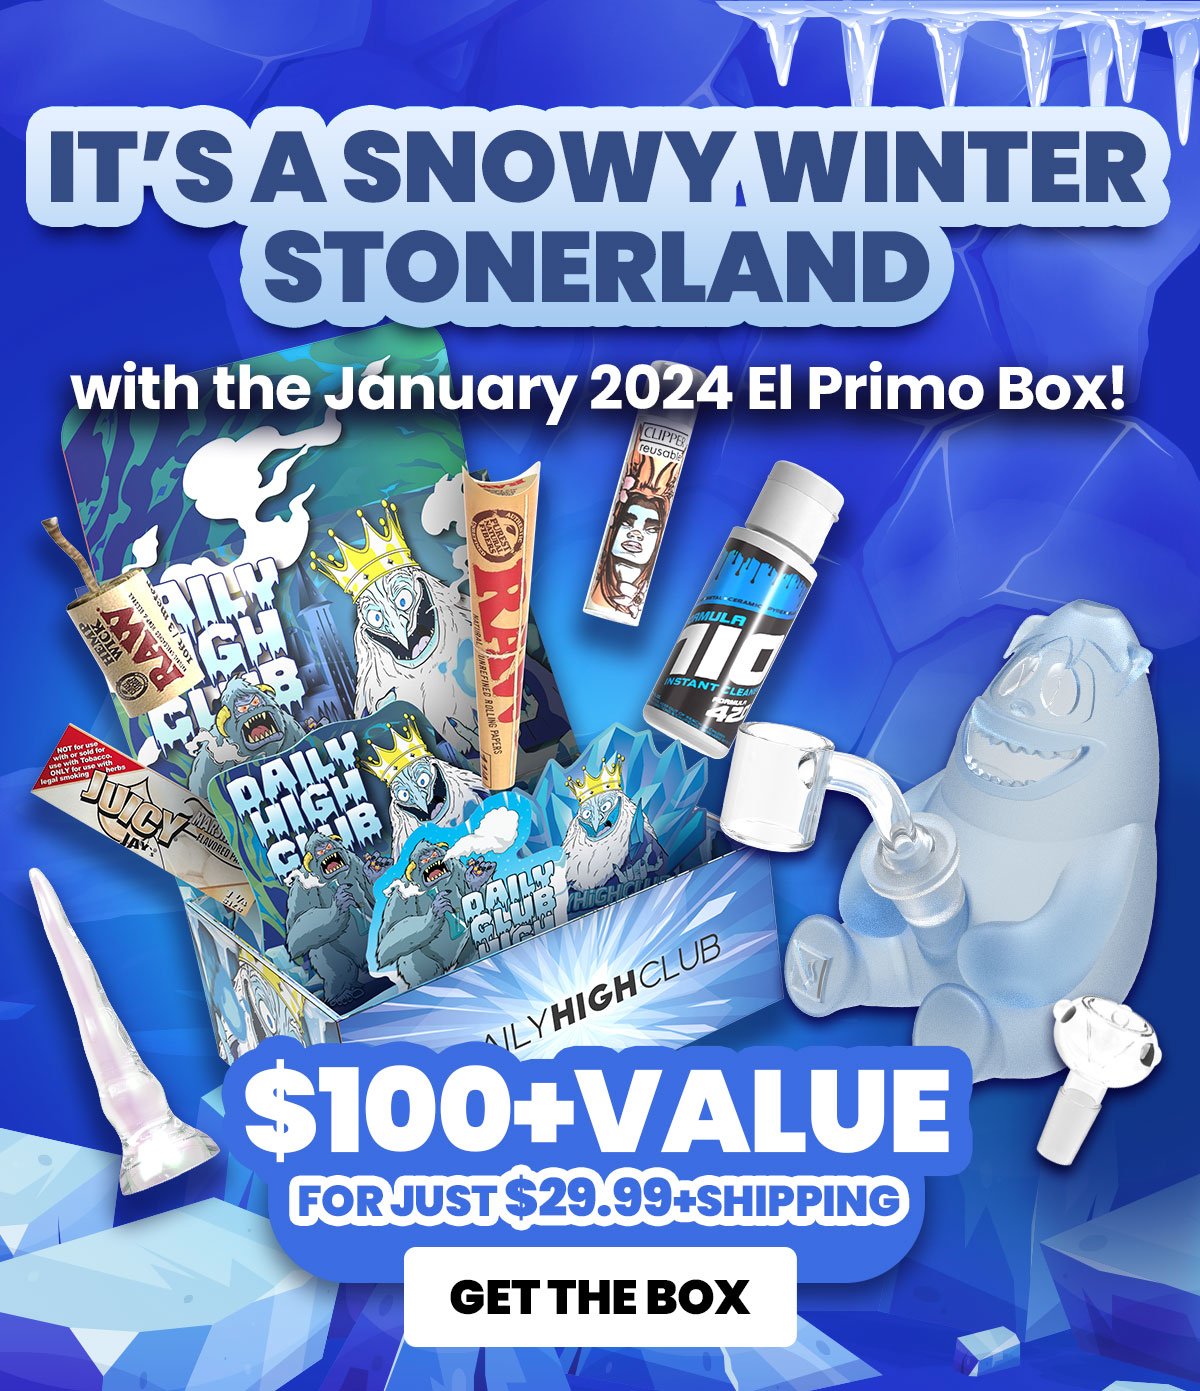 IT’S A SNOWY WINTER STONERLAND with the January 2024 El Primo Box!